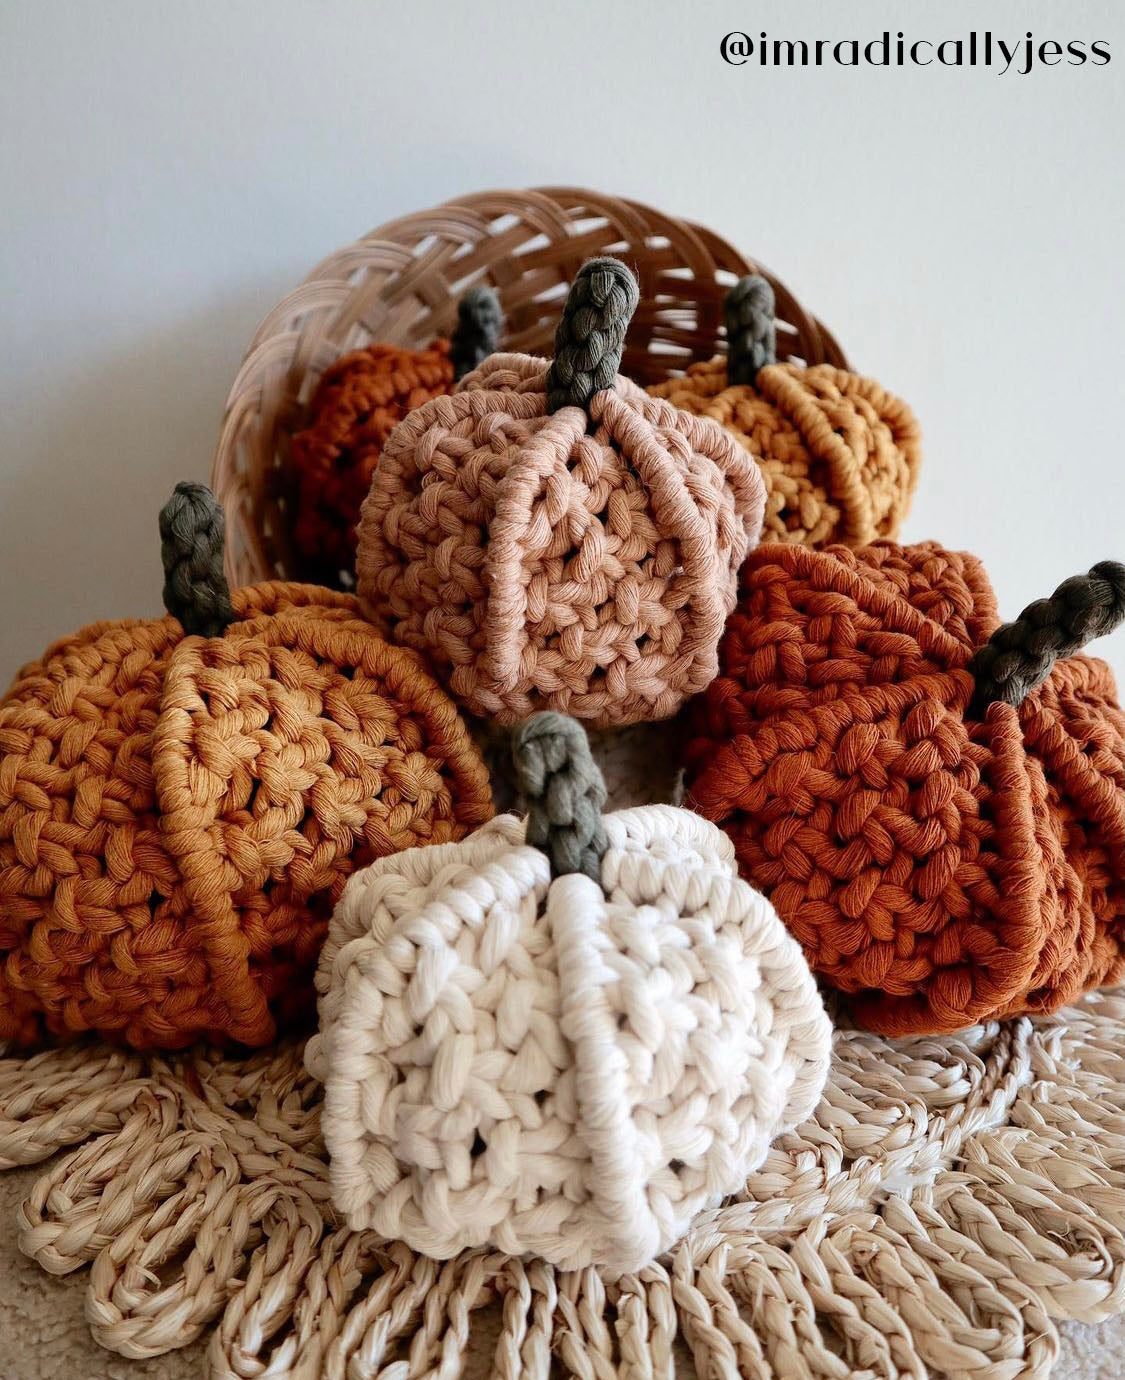 CREATIONS FROM OUR FALL MACRAME PUMPKIN DIY TUTORIAL by: Leah Aldrich from @thesunkissedknot